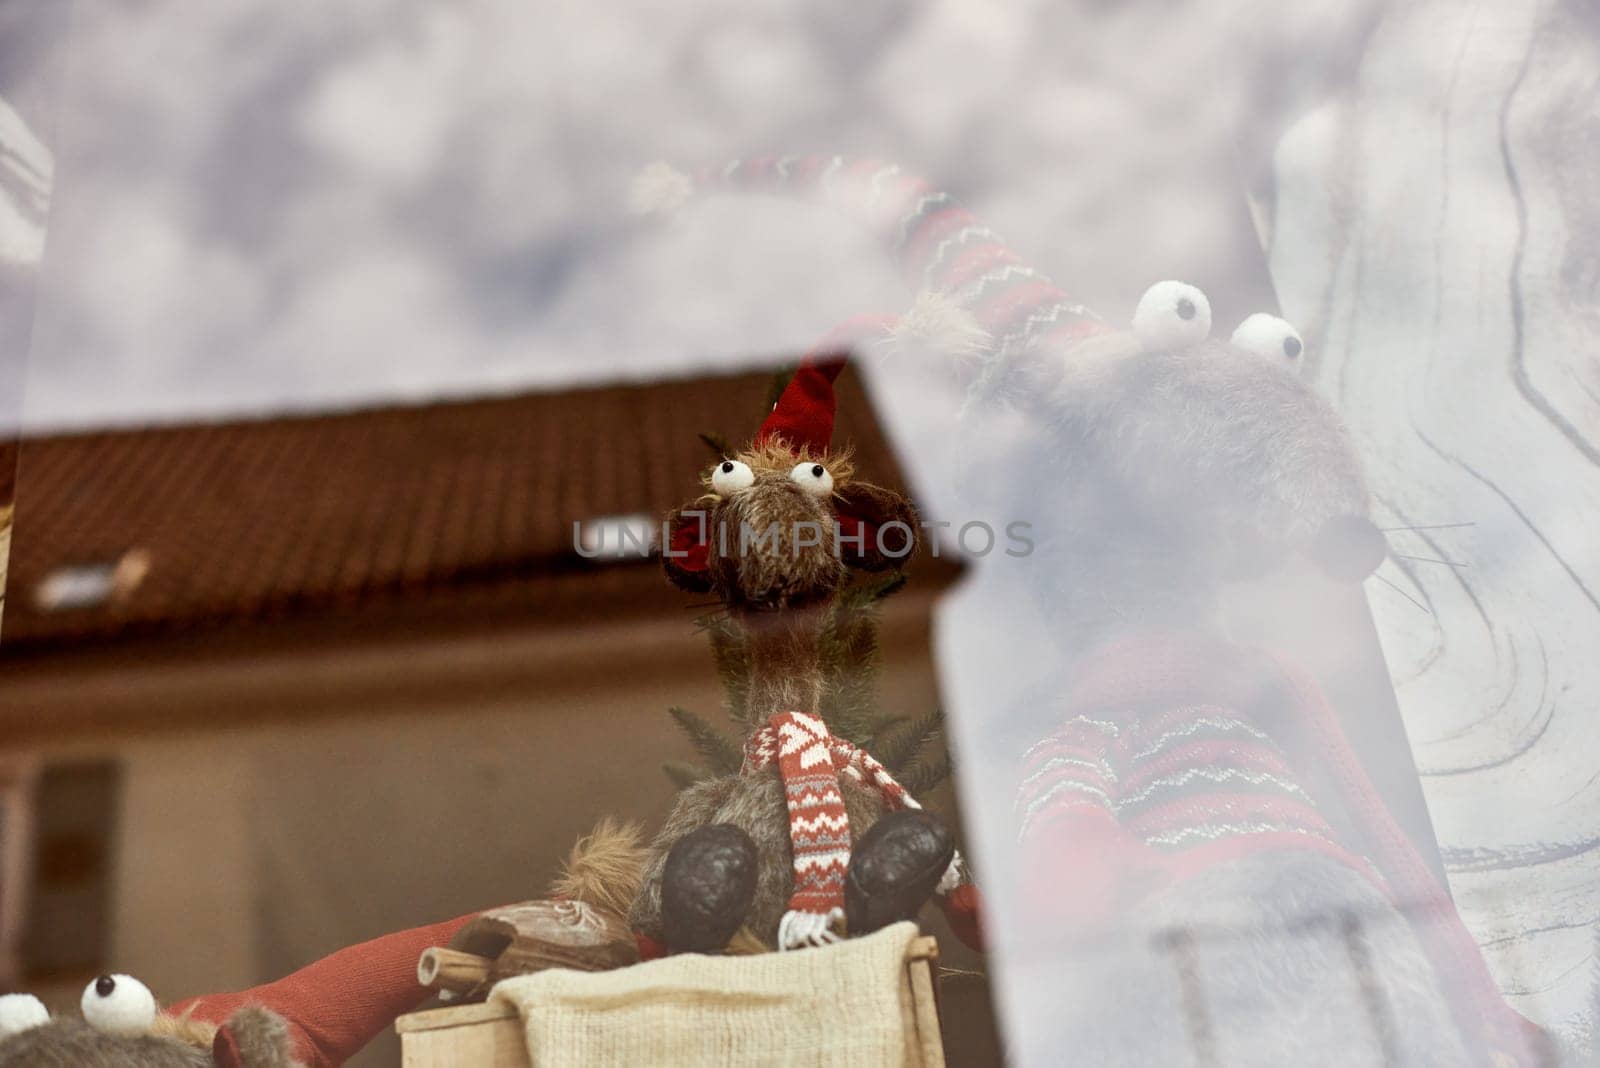 Whimsical New Year's Mouse in Cap and Scarf Stands Behind Store Display. a toy mouse or rat wearing a comical New Year's cap and scarf, playfully standing behind a shop window display. by Andrii_Ko